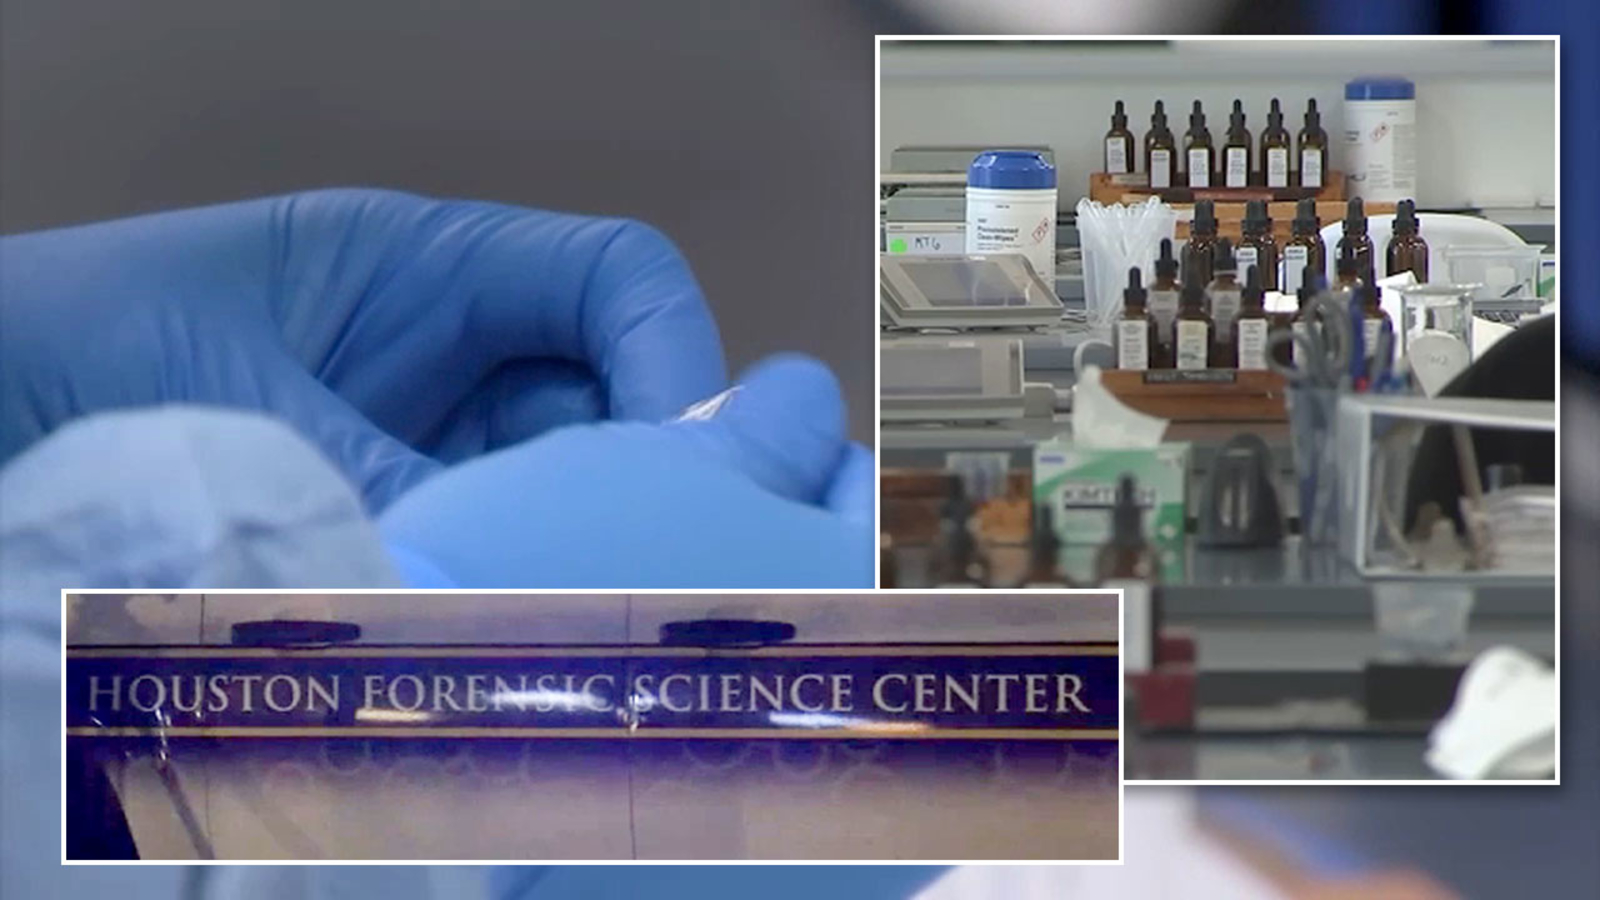 Houston Forensic Science Center analyst Rochelle Austen terminated partially due to proficiency test errors, HFSC says [Video]